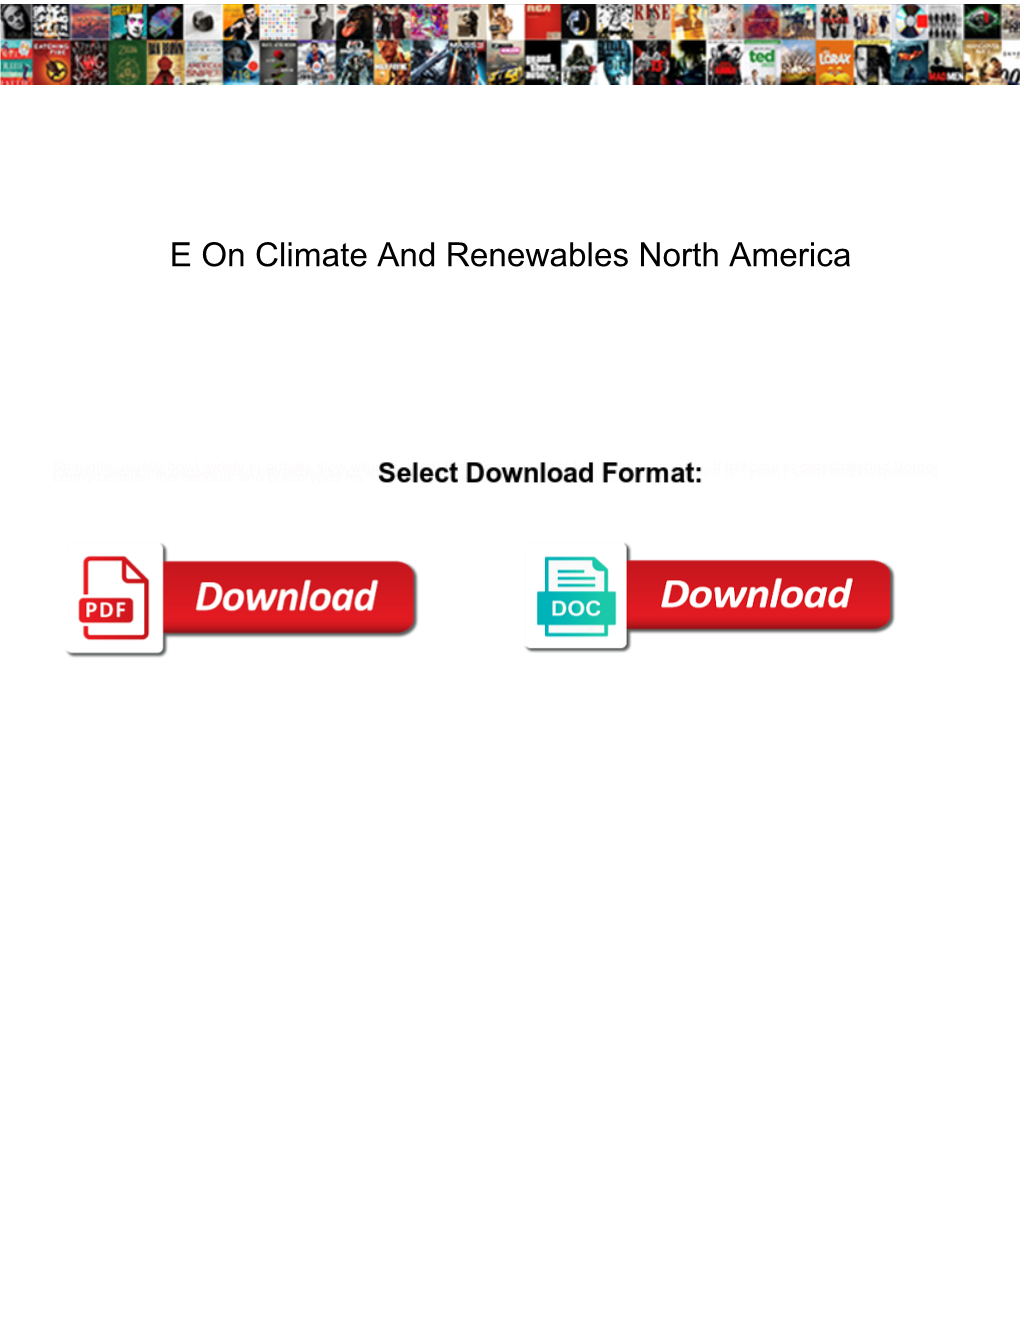 E on Climate and Renewables North America